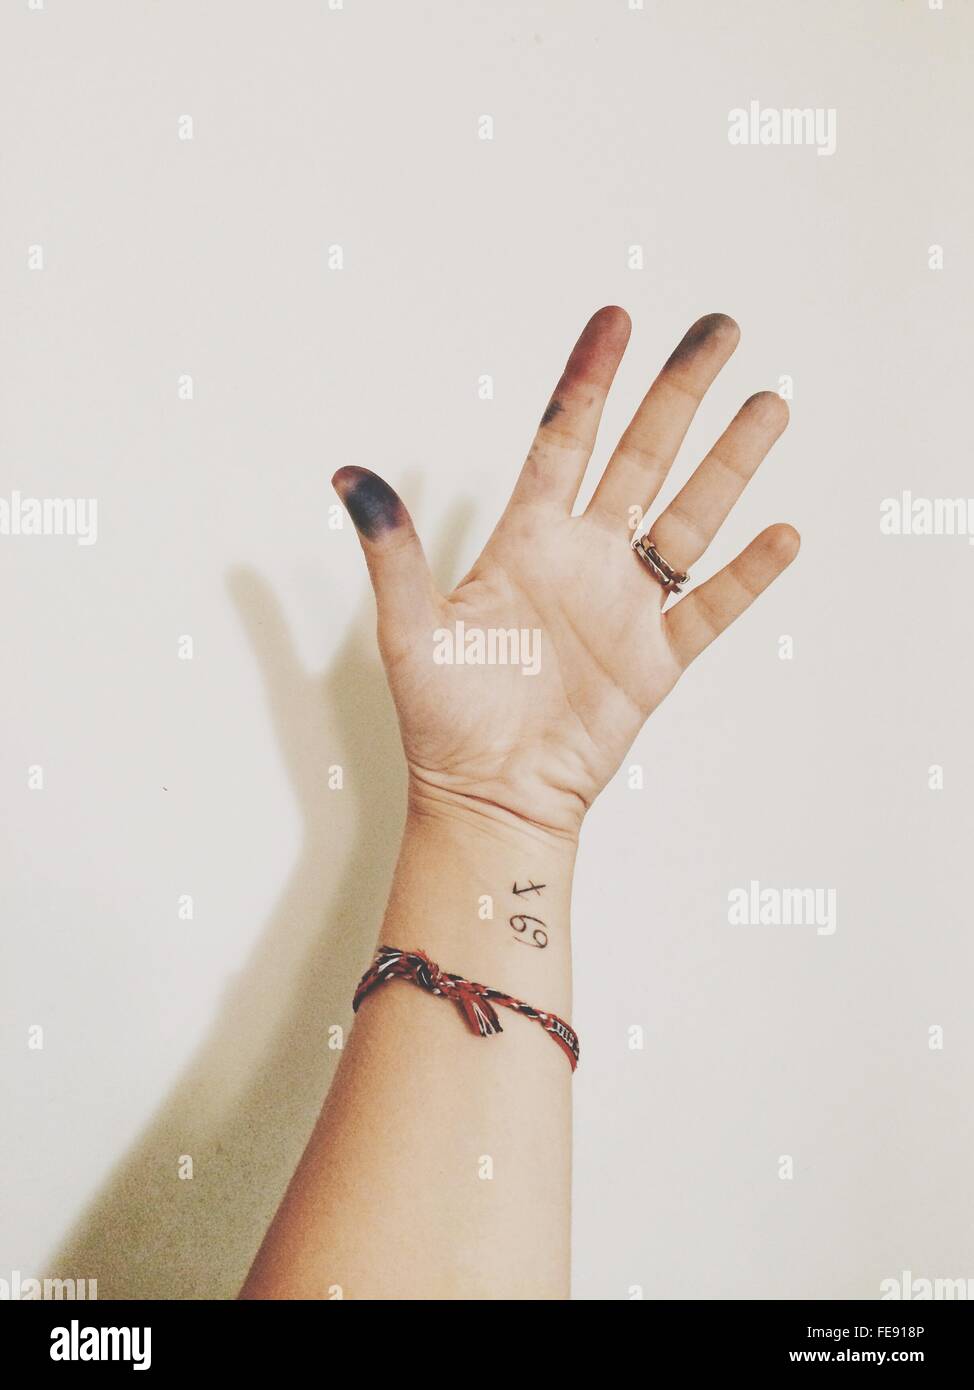 Hand Of Woman, With Tattoo And Dirty Fingers Stock Photo